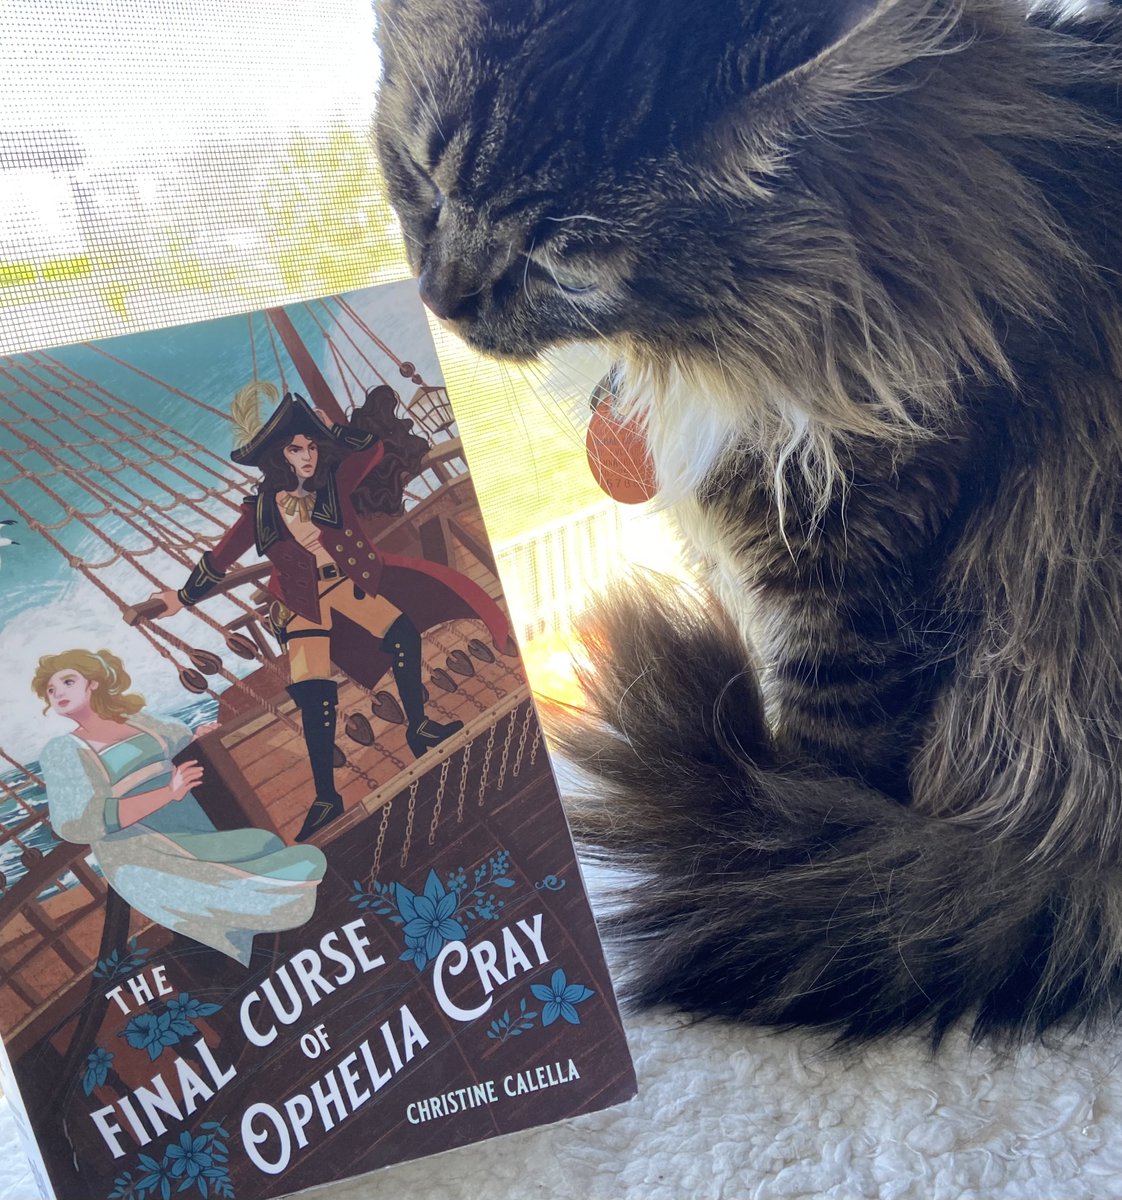 There’s an old superstition that cats onboard ships could predict the weather- whether that's got any merit, Poppy urges you all the check out THE FINAL CURSE OF OPHELIA CRAY! This swashbuckling YA fantasy adventure about the bonds of sisters is sure to captivate you! @ct_calella